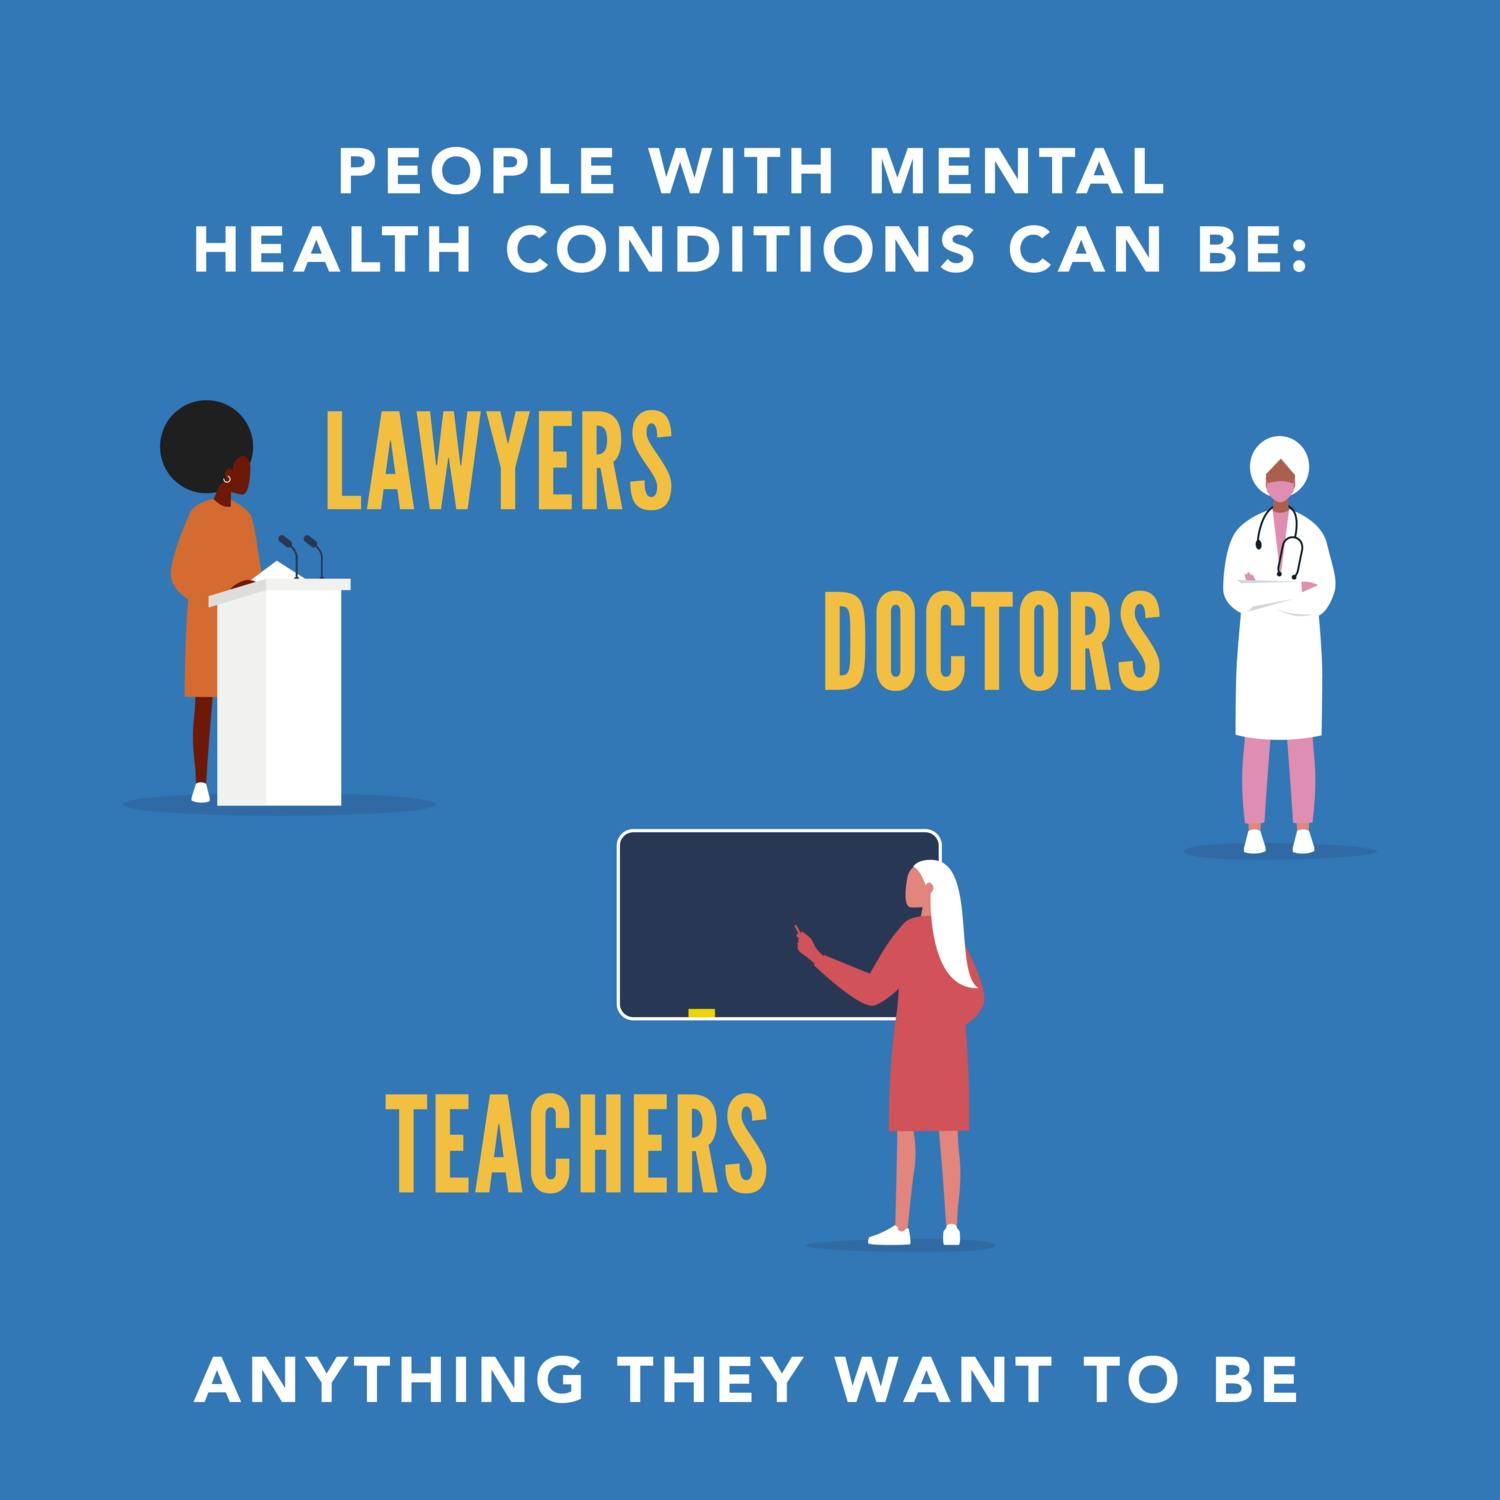 People with mental health conditions can be: lawyers, doctors, teachers, or anything they want to be